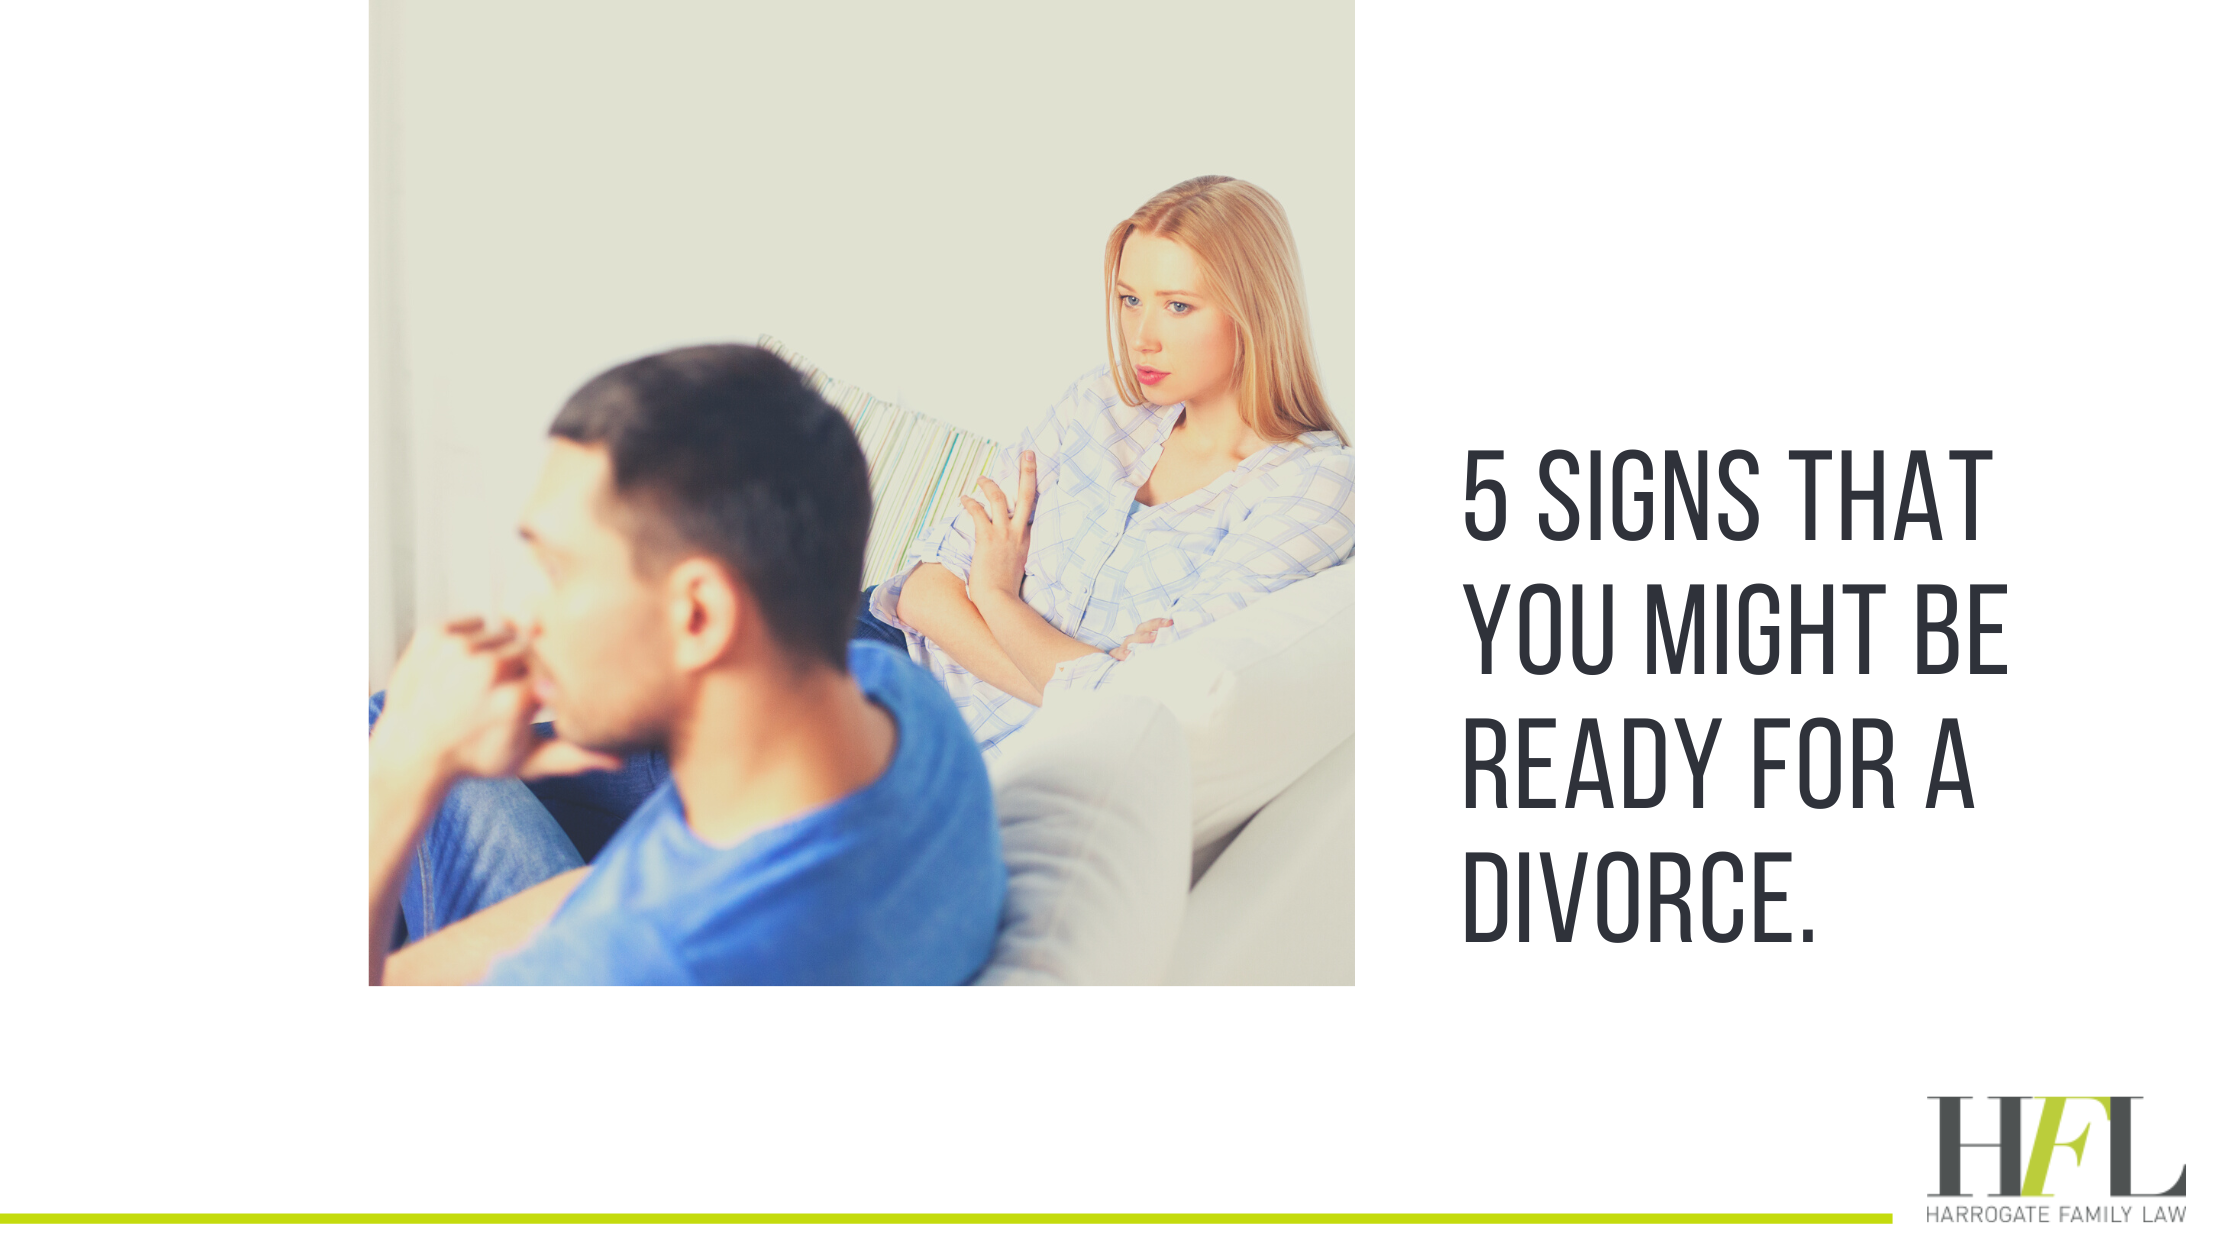 5 signs that you might be ready for a divorce